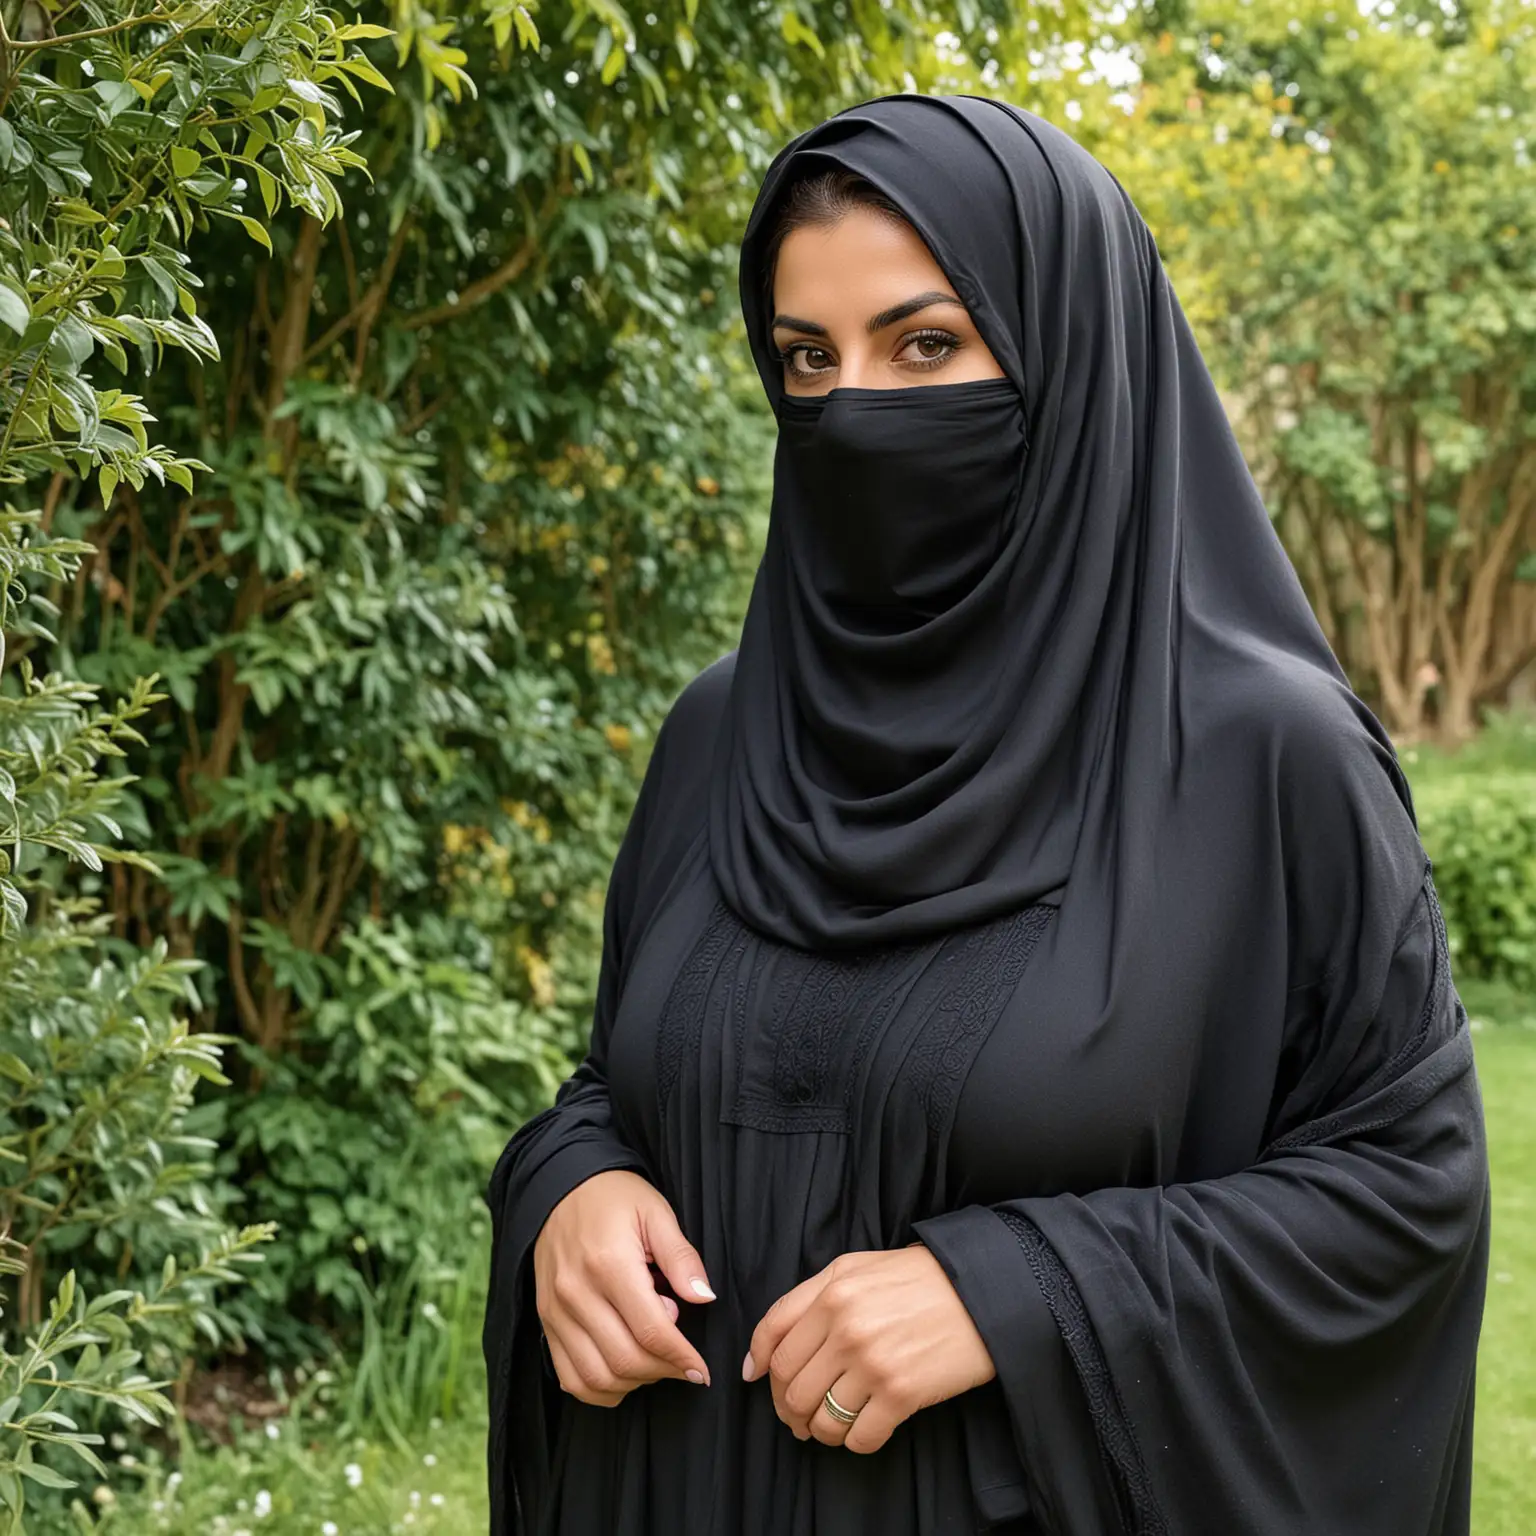 sexy slim 40 year old iranian woman with huge 40F breasts, in a loose burqa with niqab, with beautiful free flowing brown hair, full size, in a garden. Not showing her hands
